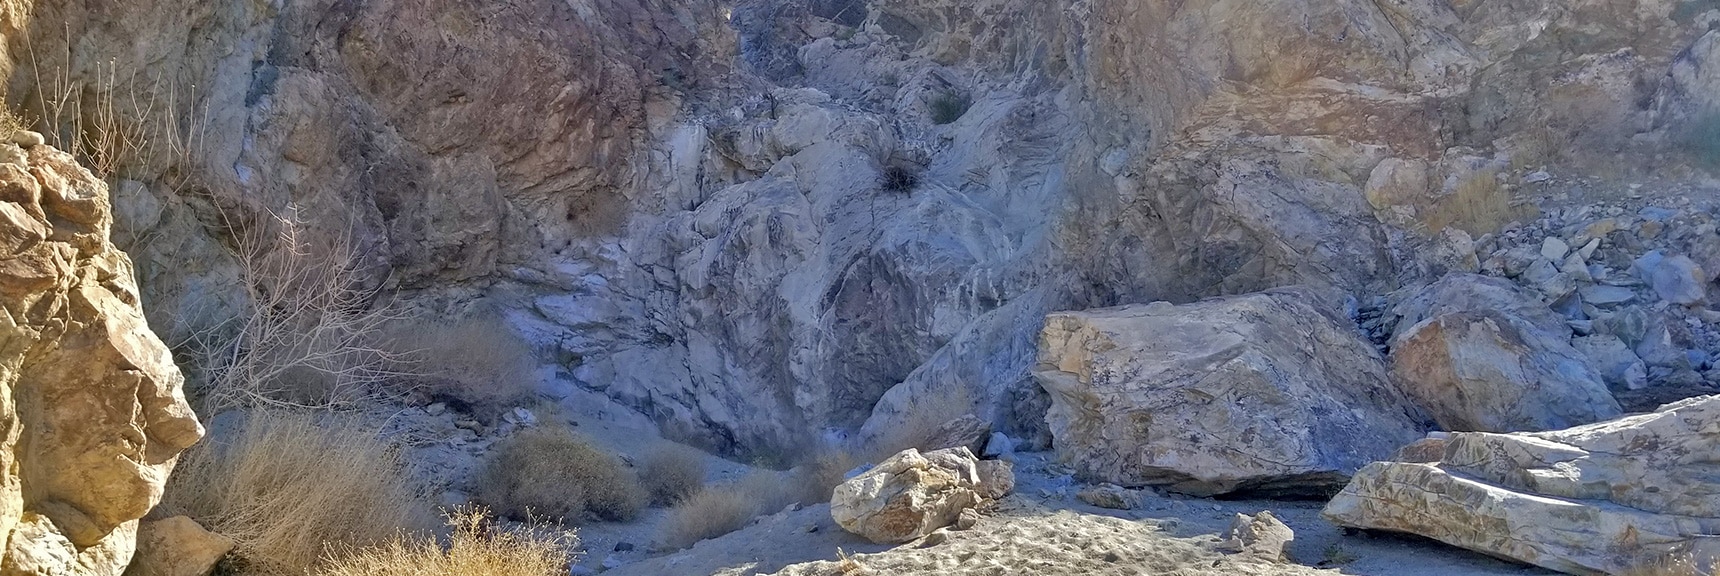 Horse Thief Canyon Road Ends at a 20-30ft Dry Waterfall | Mt Wilson, Black Mountains, Arizona, Lake Mead National Recreation Area